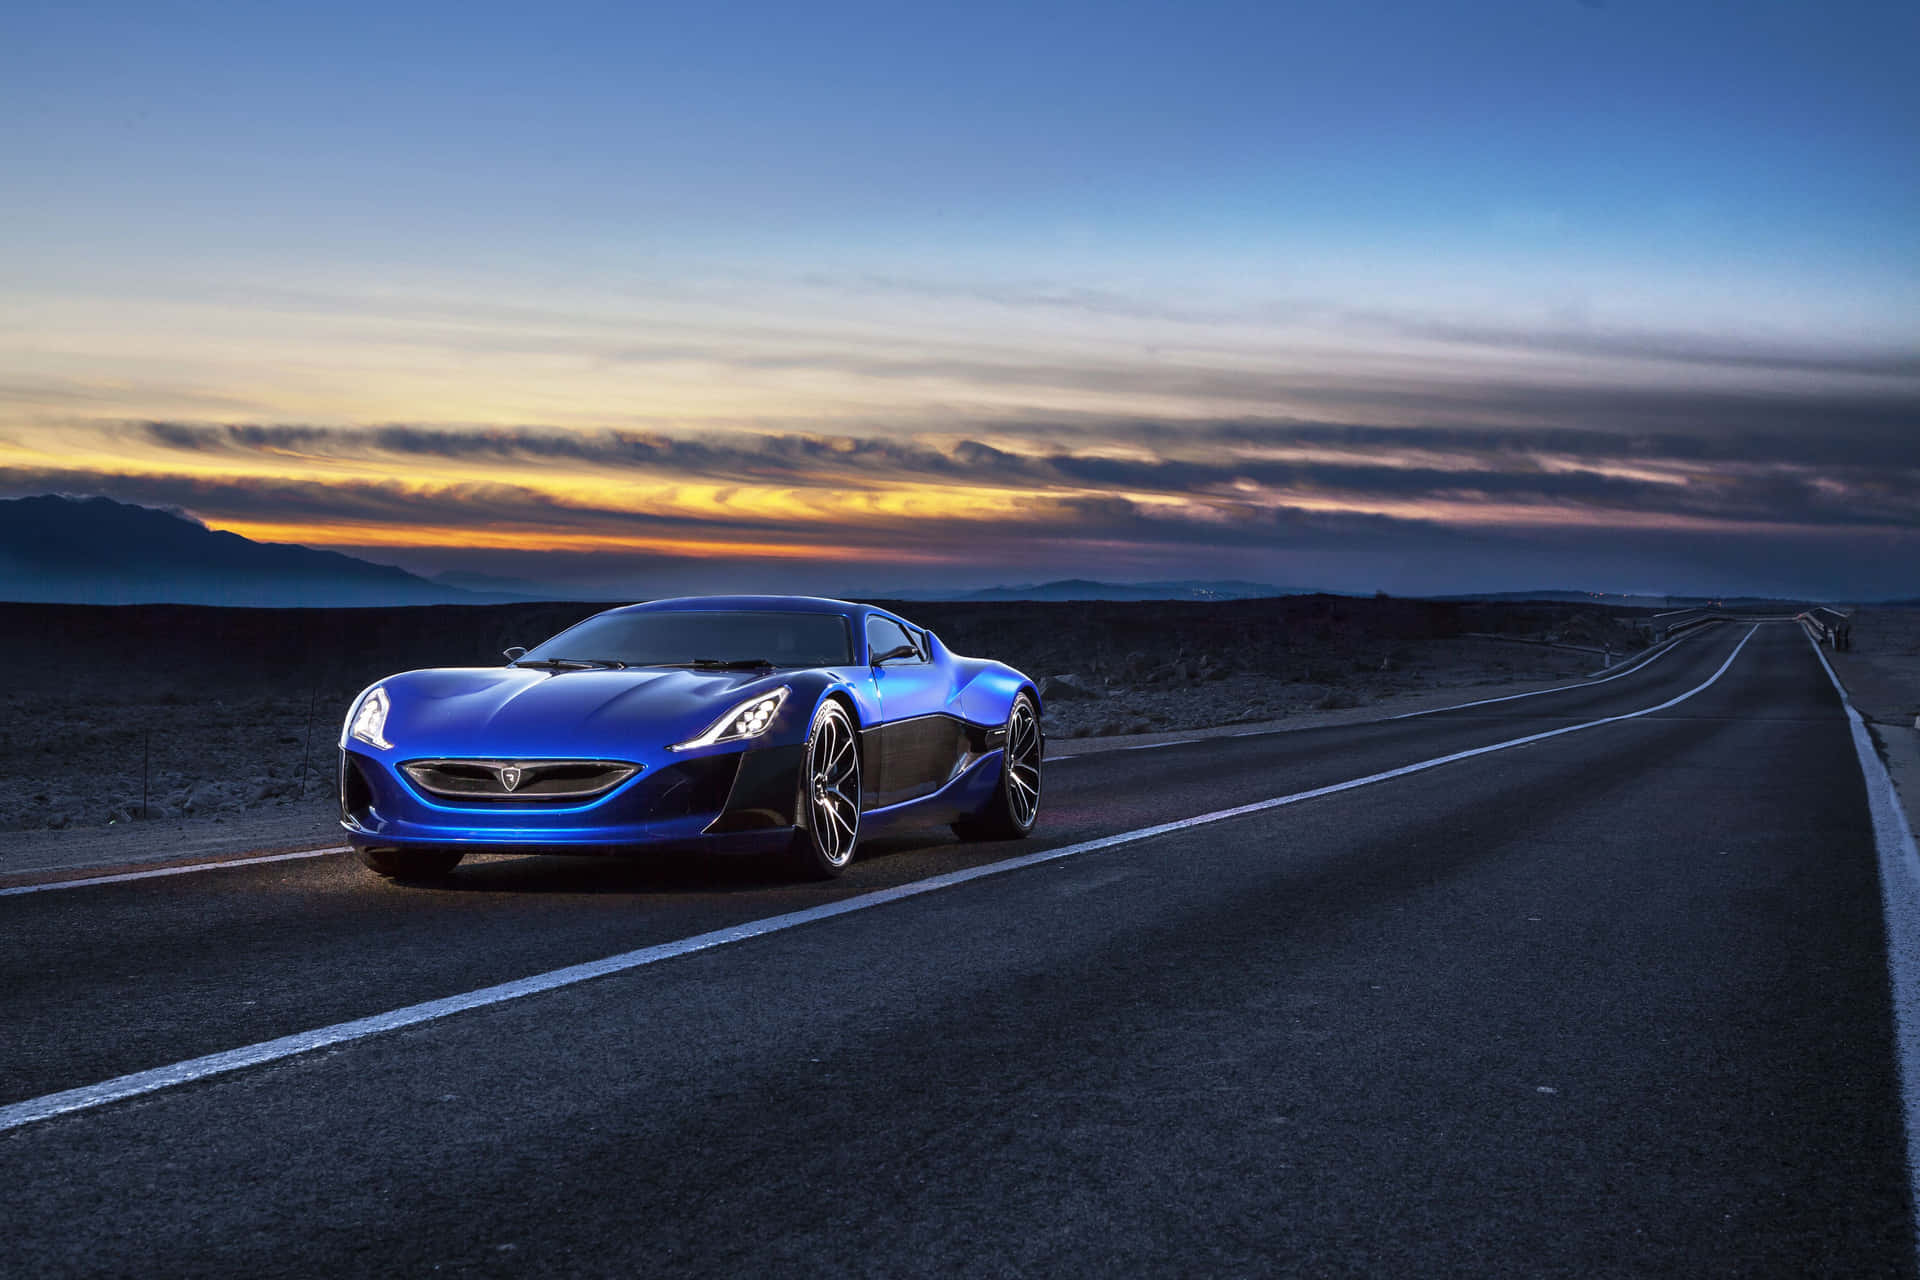 Rimac Concept One - The Ultimate Electric Supercar Wallpaper